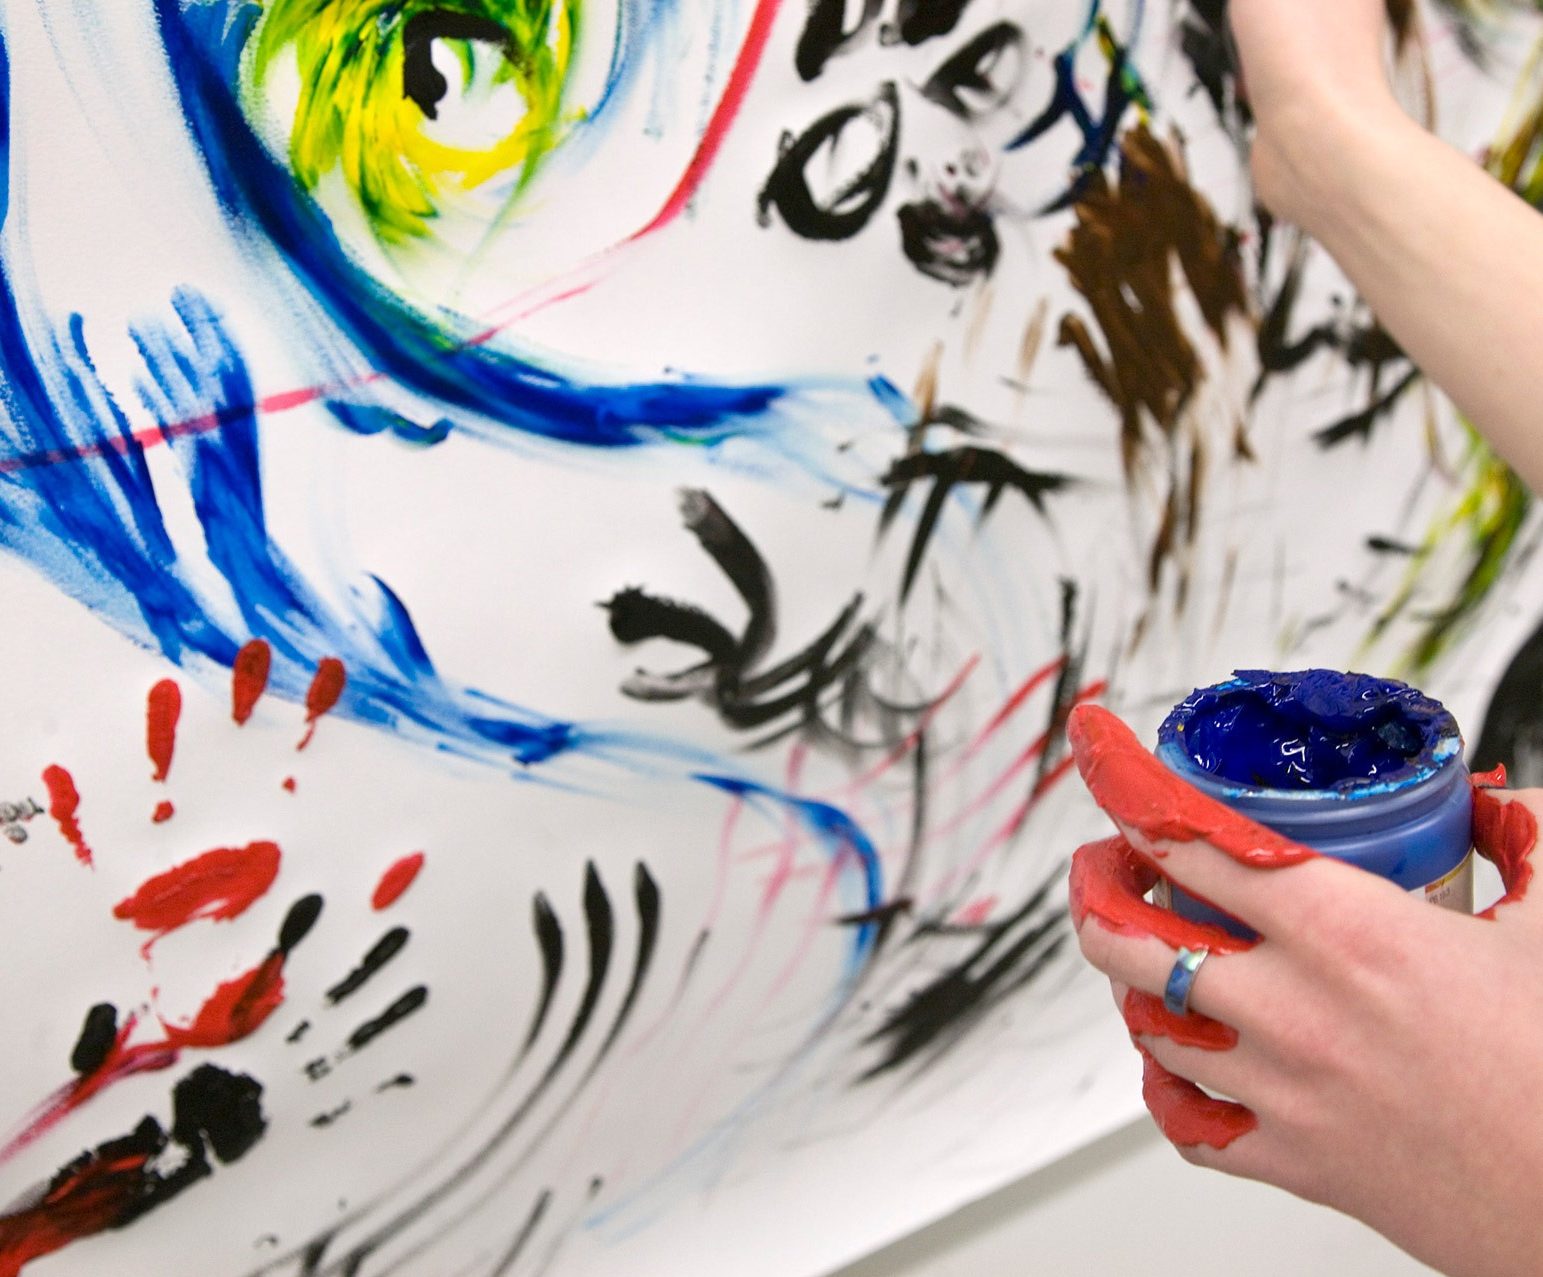 a person whose hand is covered in paint, finger painting on a large canvas